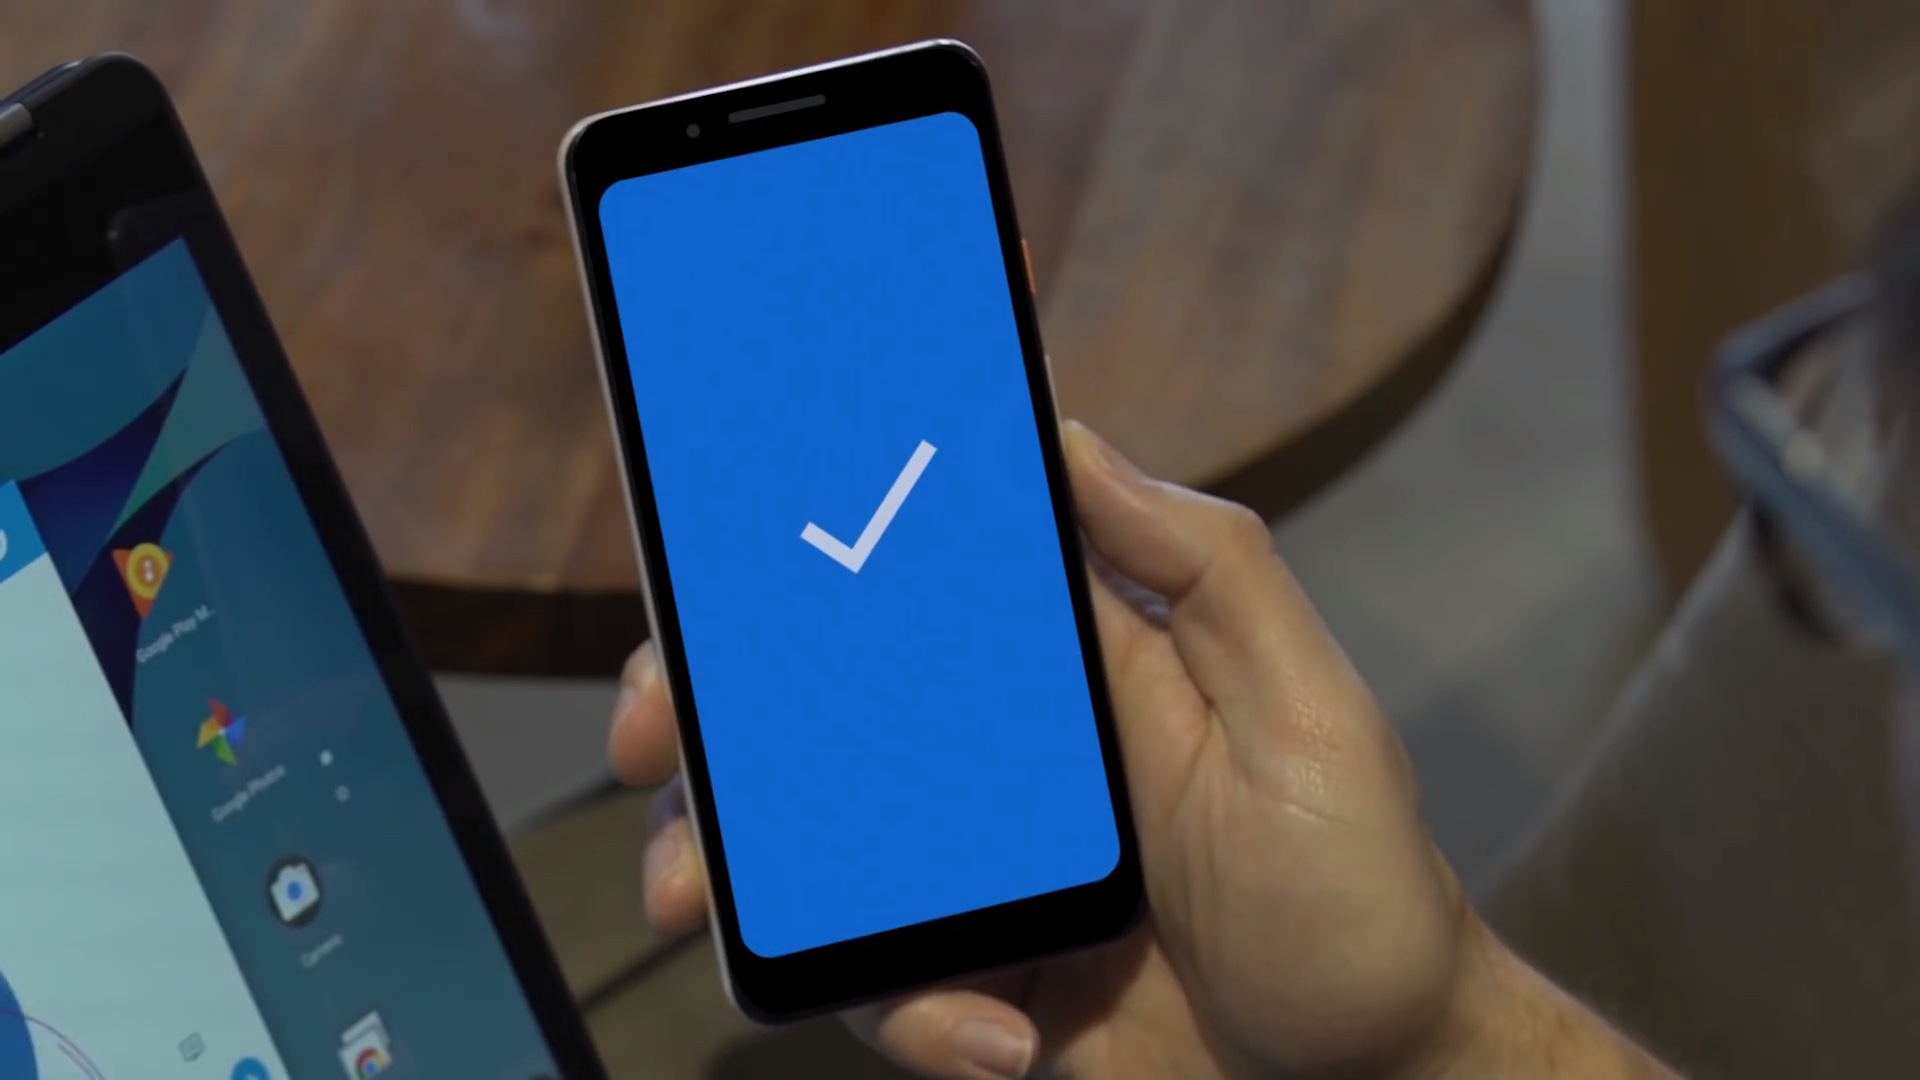 Now you can use your Android phone as a physical two-factor authentication key